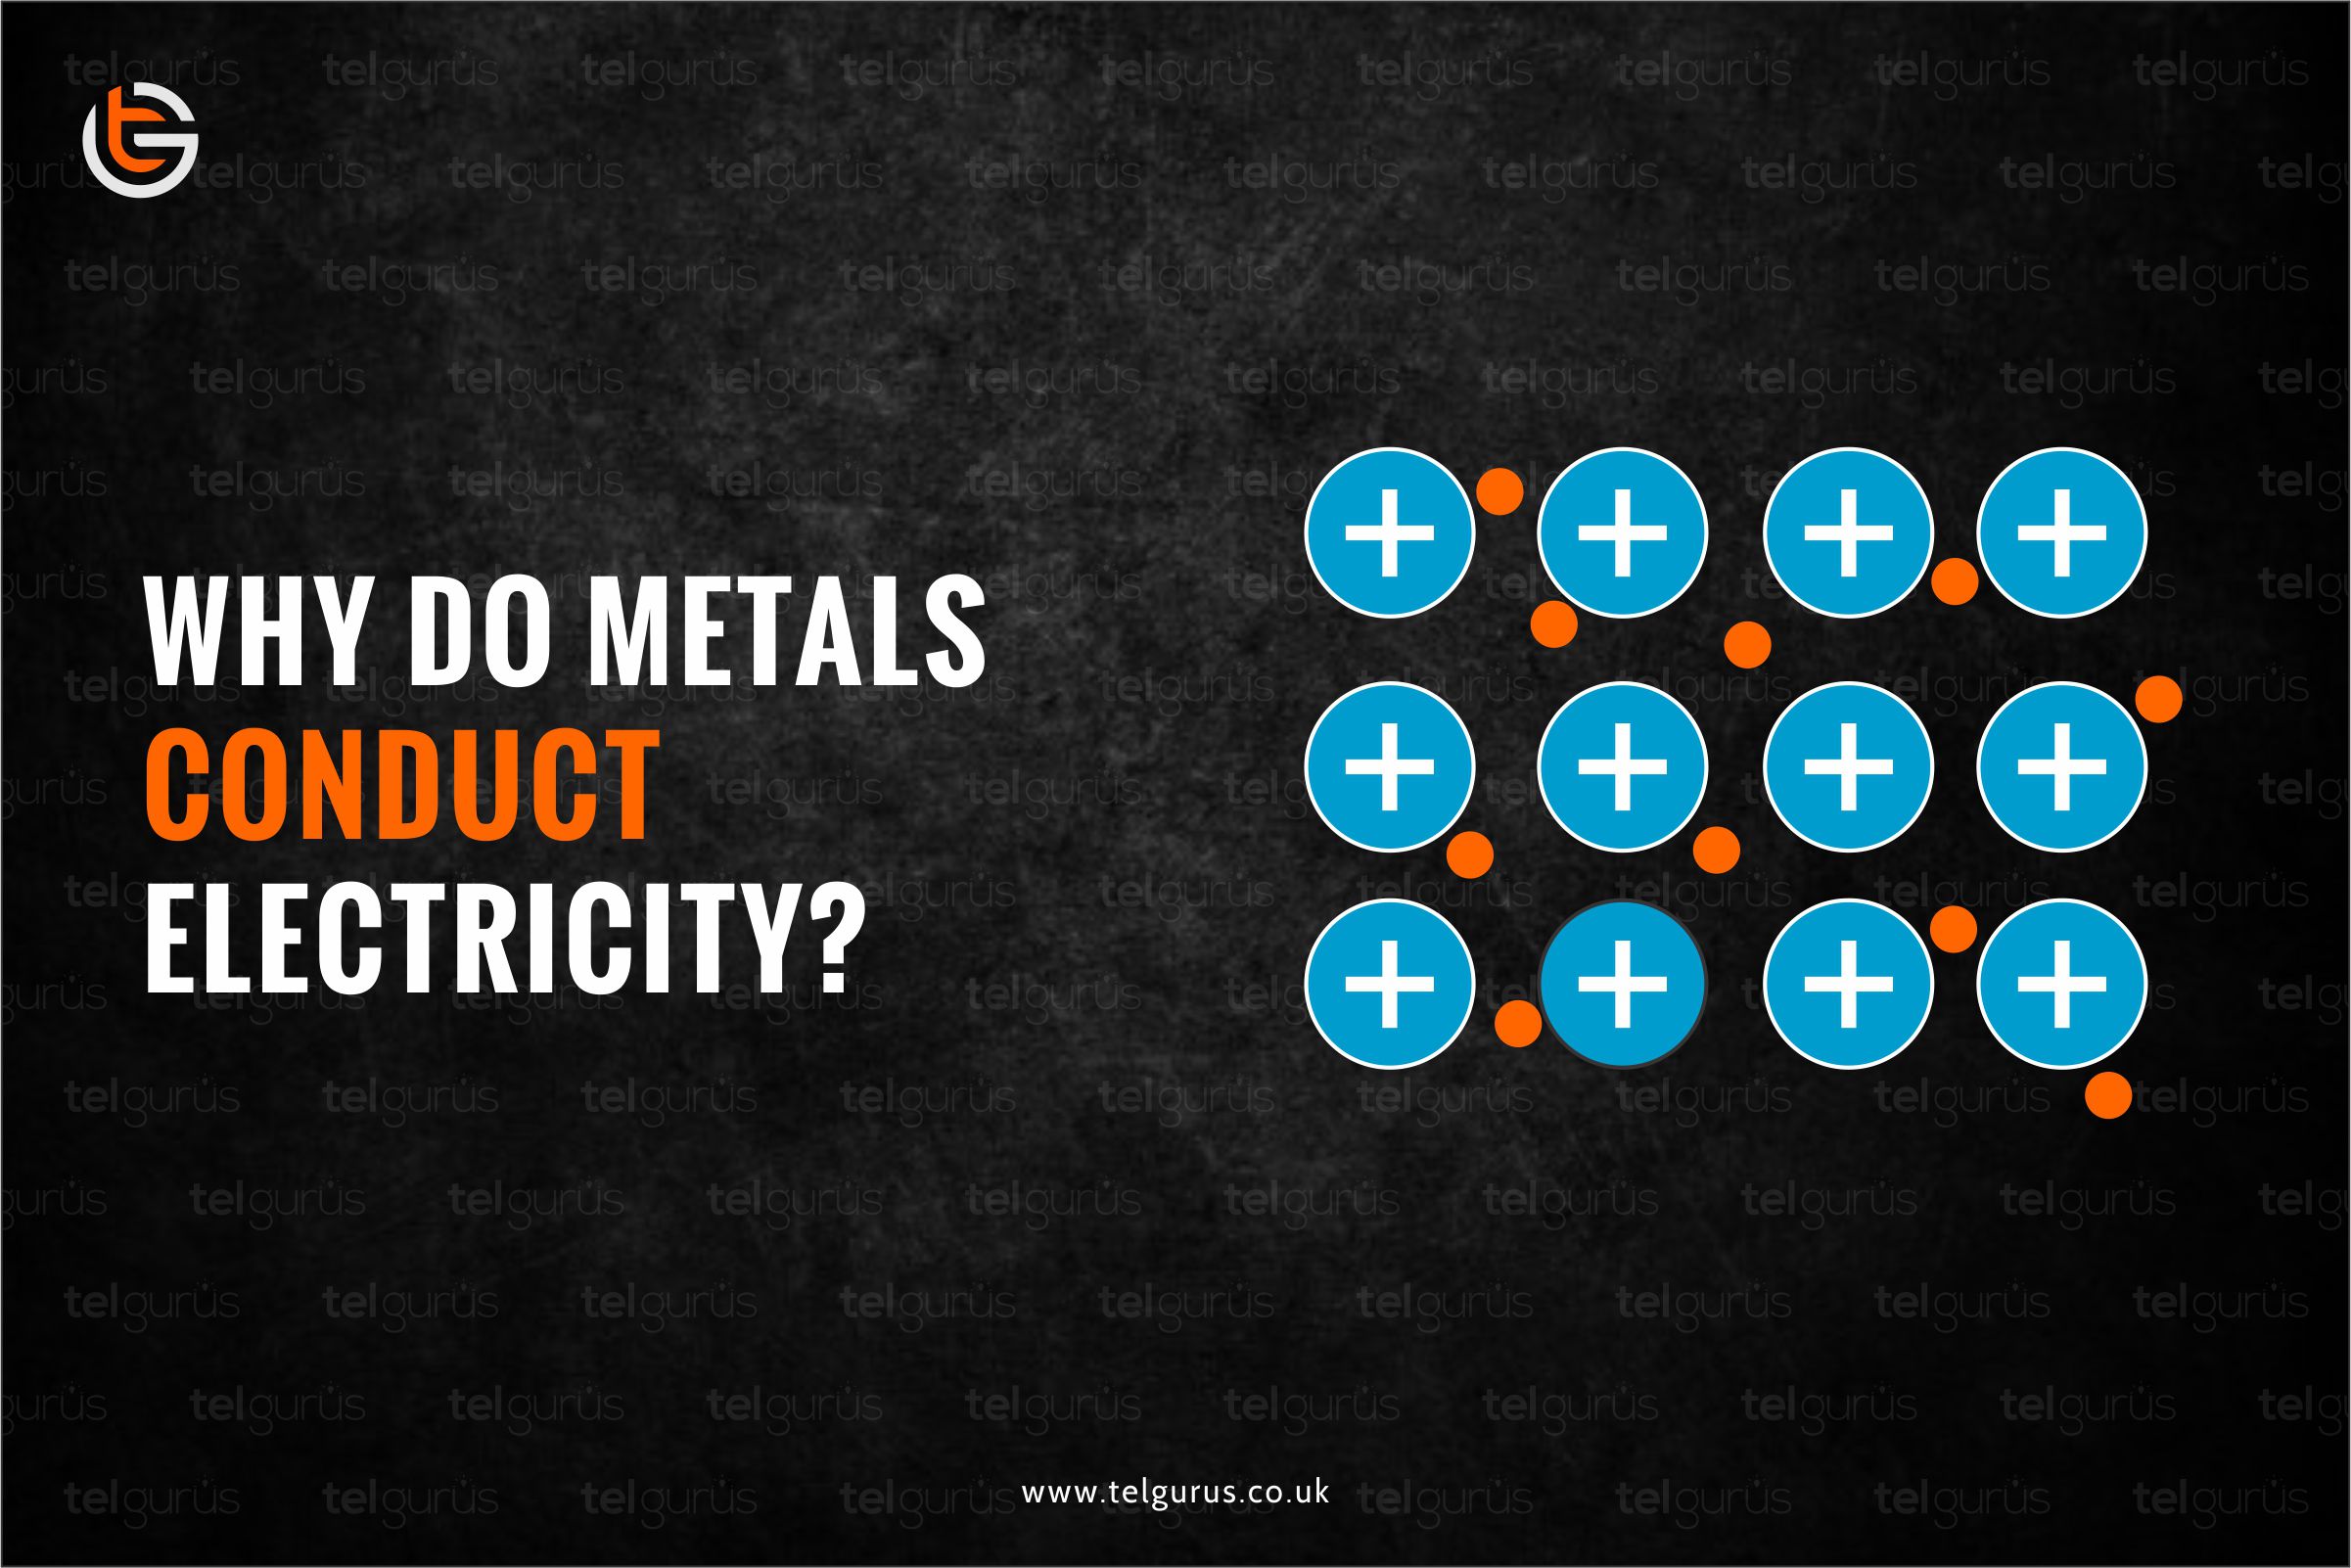 Why are metals good conductors of electricity?